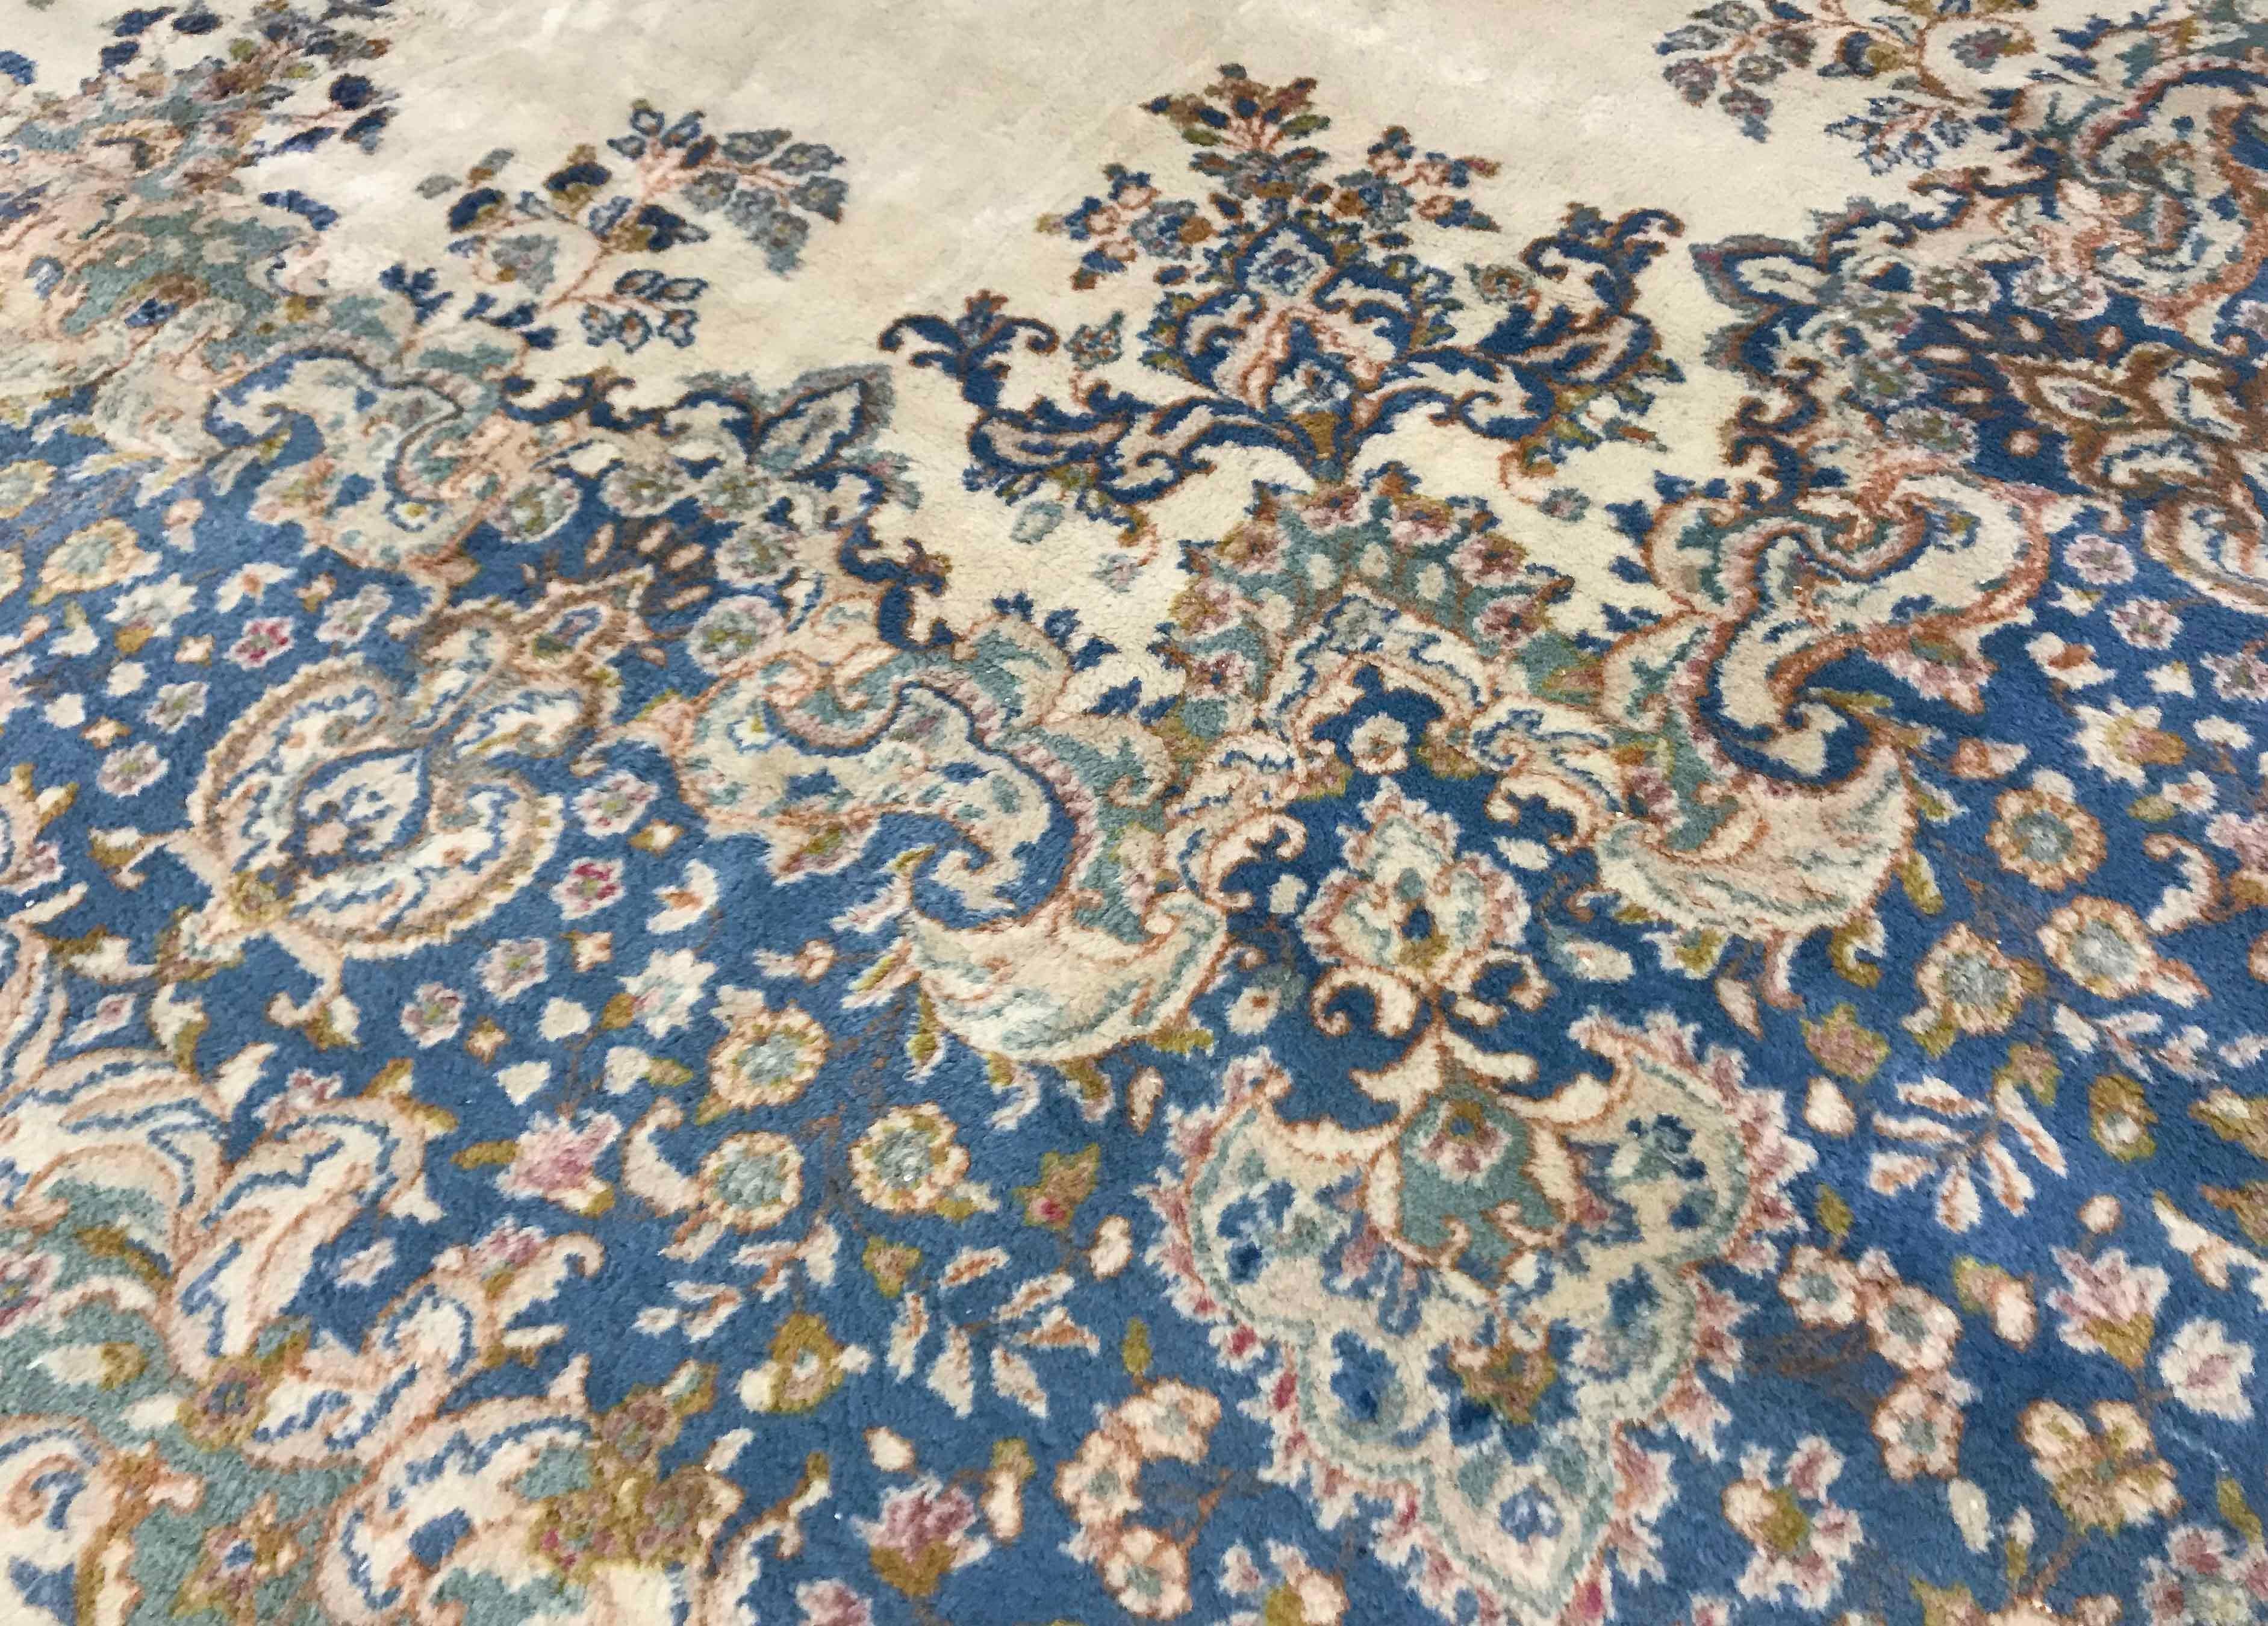 Vintage oversize Kerman rug, circa 1940. This attractive oversized Kerman has an ivory ground enclosing a central floral design in soft pastel blues with a floral theme surrounding the central field, the main border continues the soft blue colors